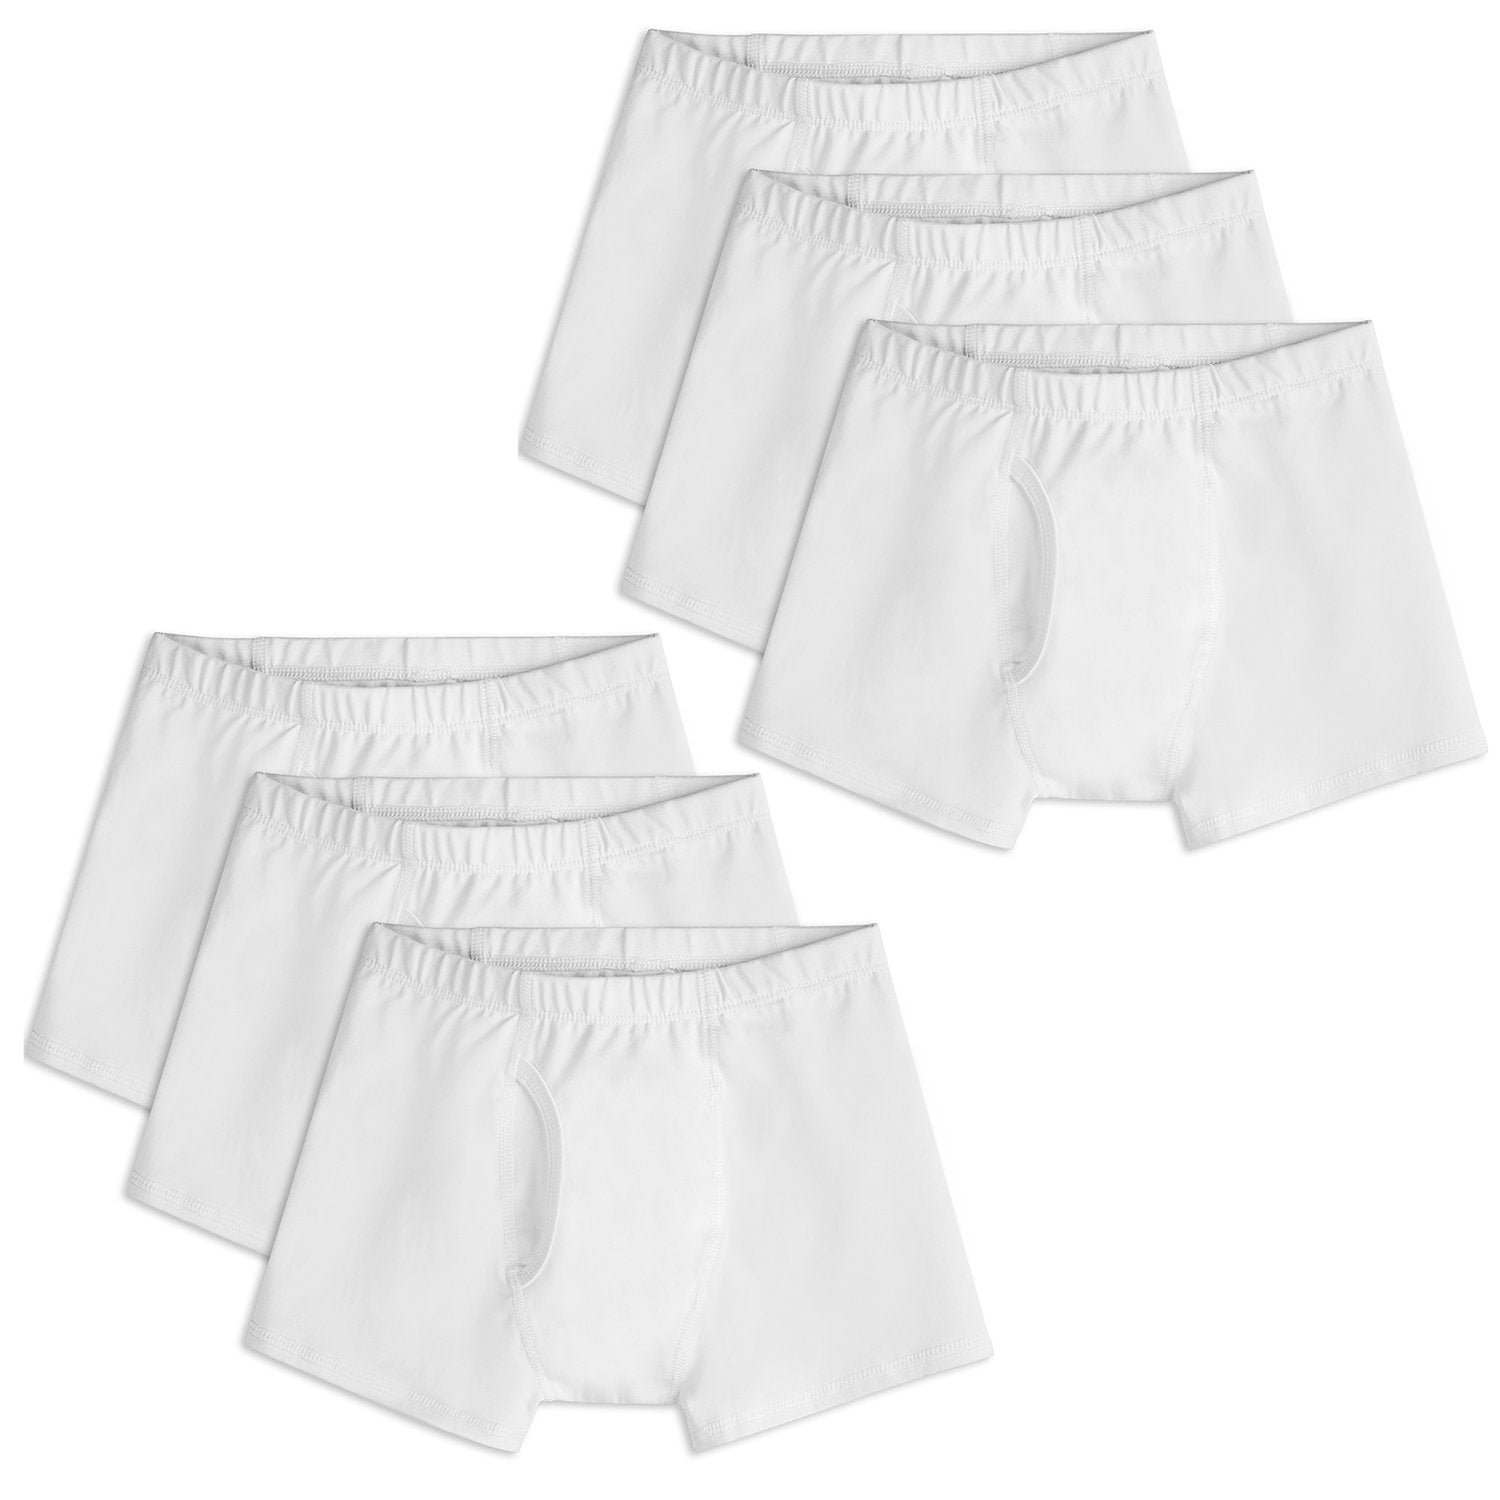 Boy's Shorts Premium Quality - Breathable Sweat Proof and Stretchy Fabric  in Different Sizes White Cotton Boxer for Boys 4 Pieces Underwear Pack  (13-14) price in UAE,  UAE